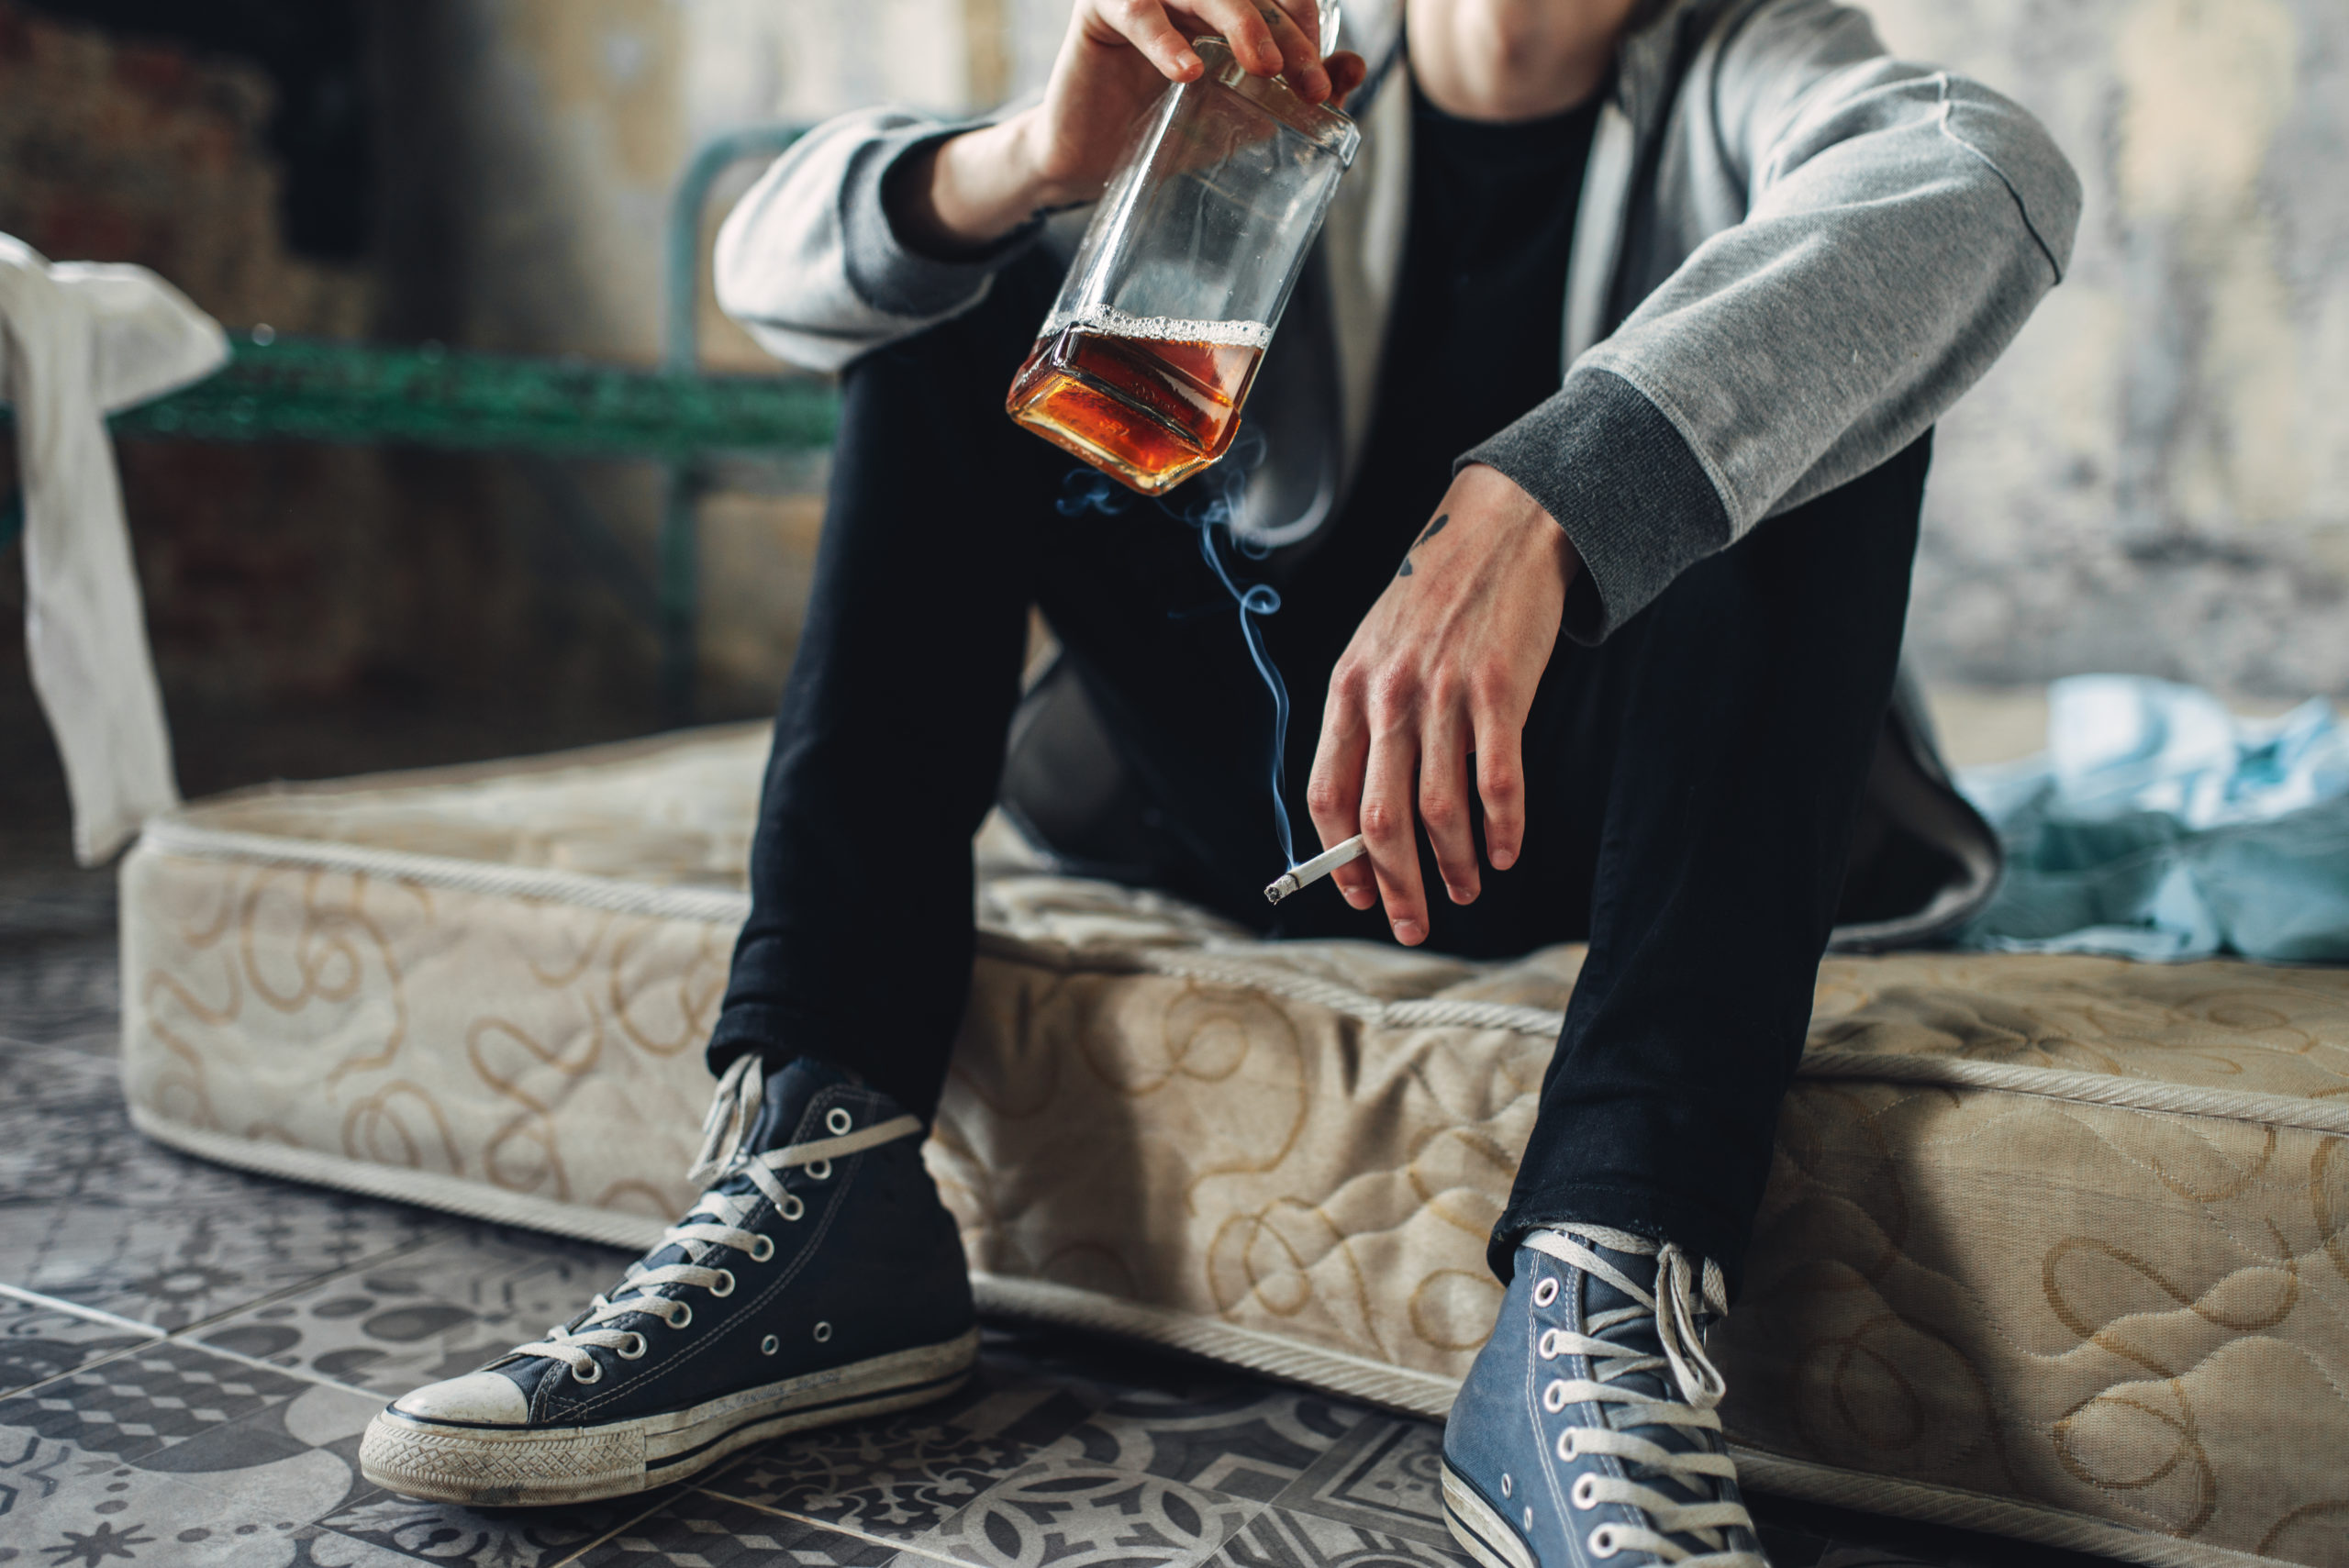 Addicted male person sitting on the mattress with cigarette and bottle of alcohol in hands, grunge room interior on background. Addiction concept